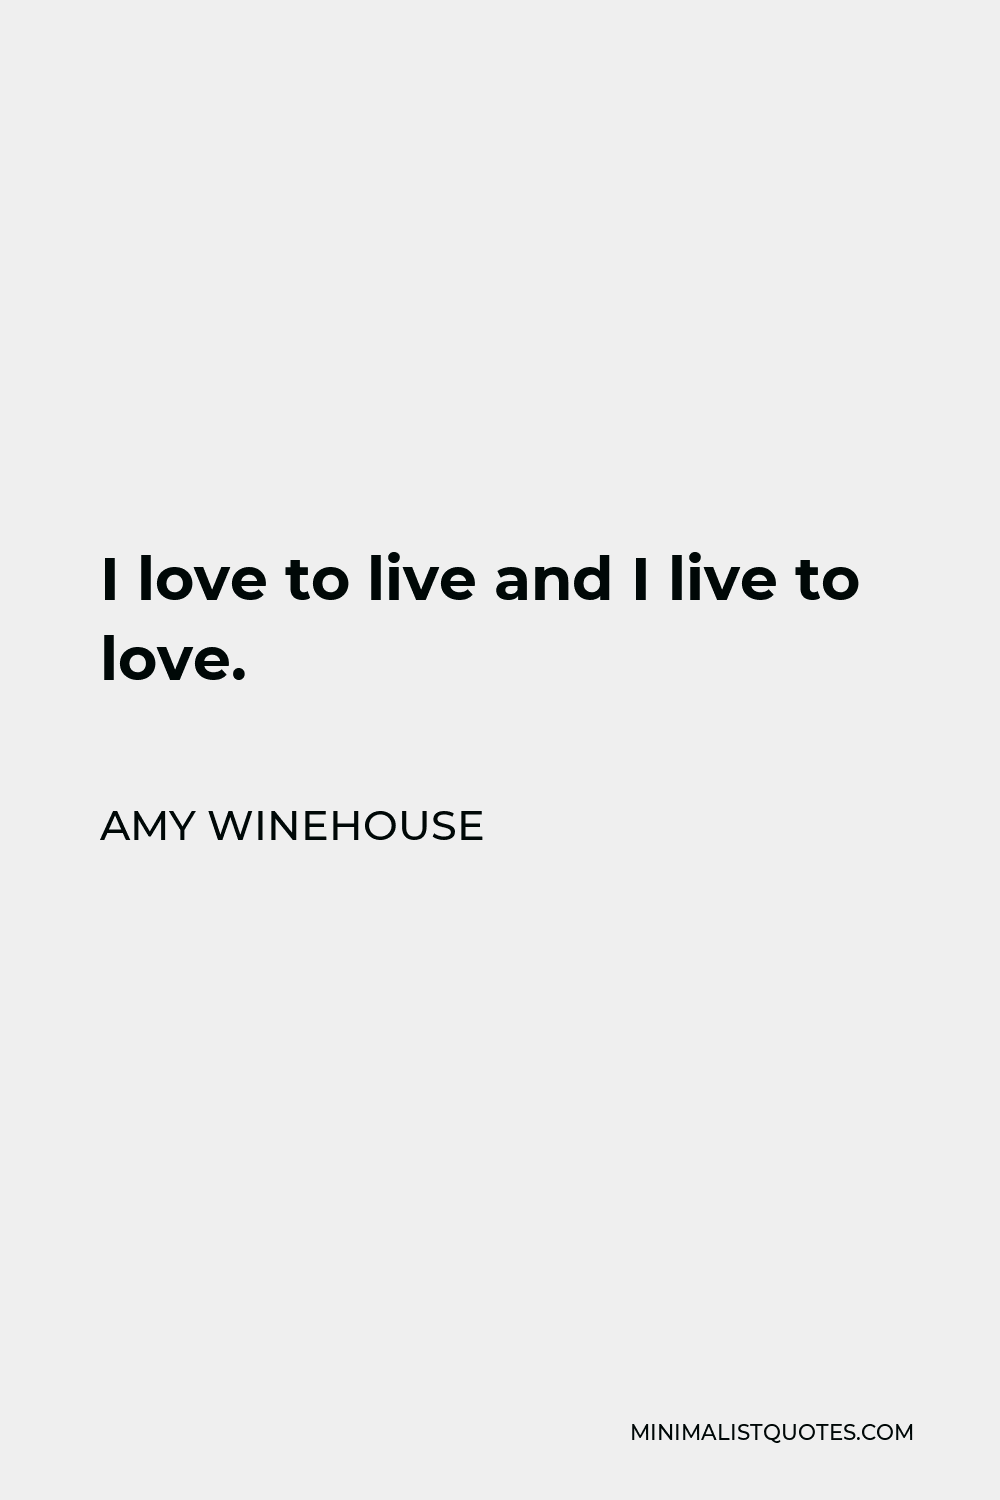 Amy Winehouse Quote - I love to live and I live to love.